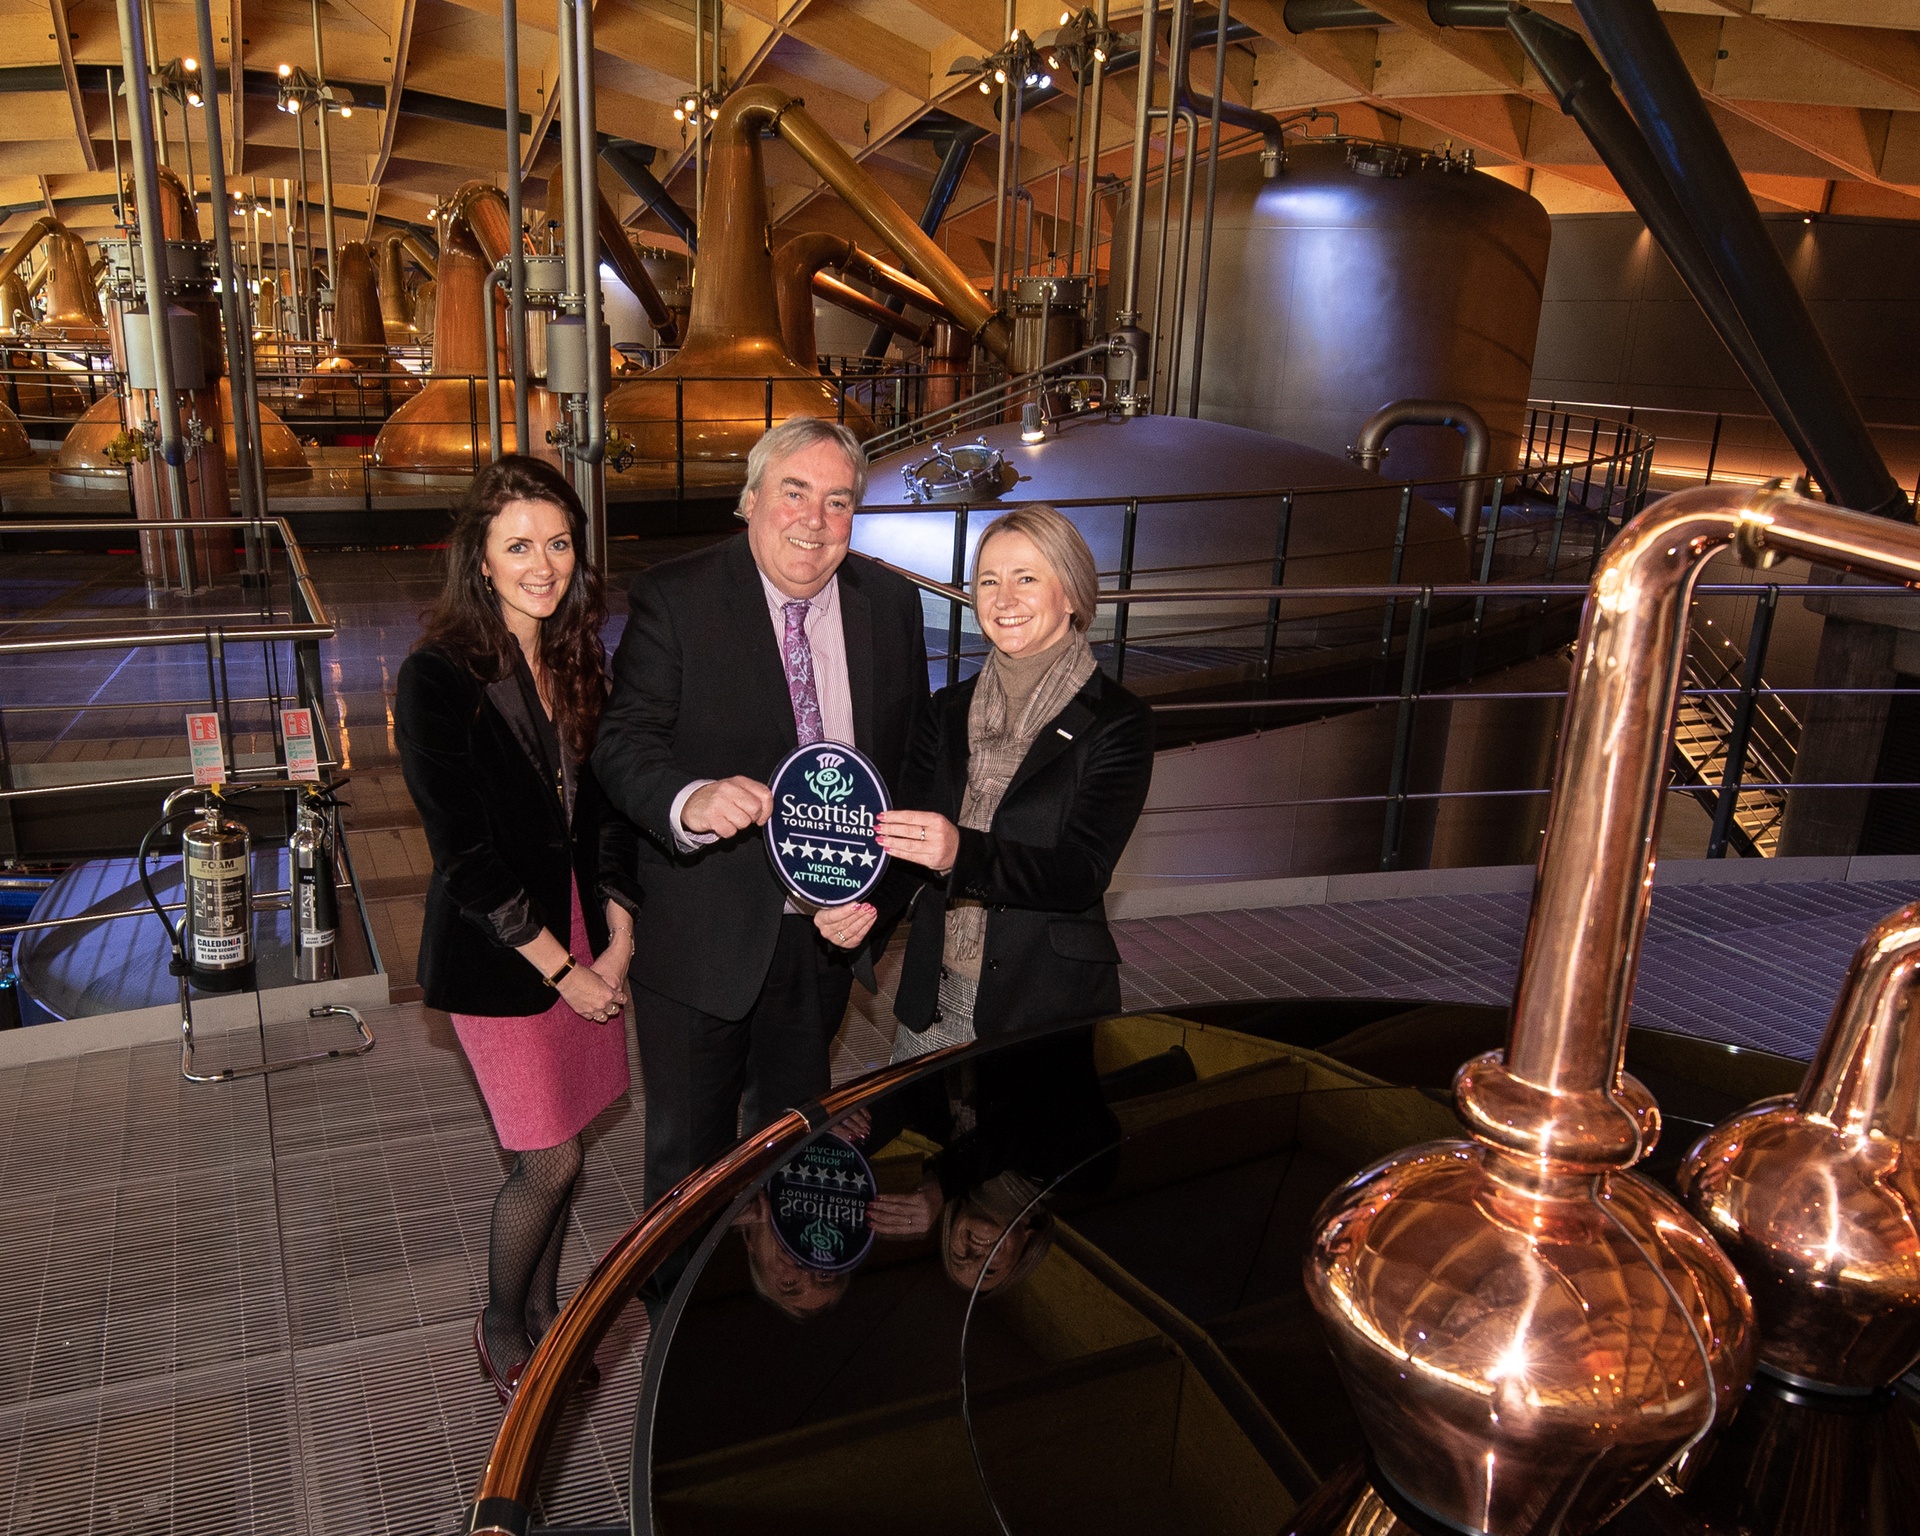 VisitScotland Chief Executive, Malcolm Roughead presents General Manager at The Macallan, Gail Cleaver with a five-star VisitScotland quality assurance award. They are joined by VisitScotland Regional Director, Jo Robinson.